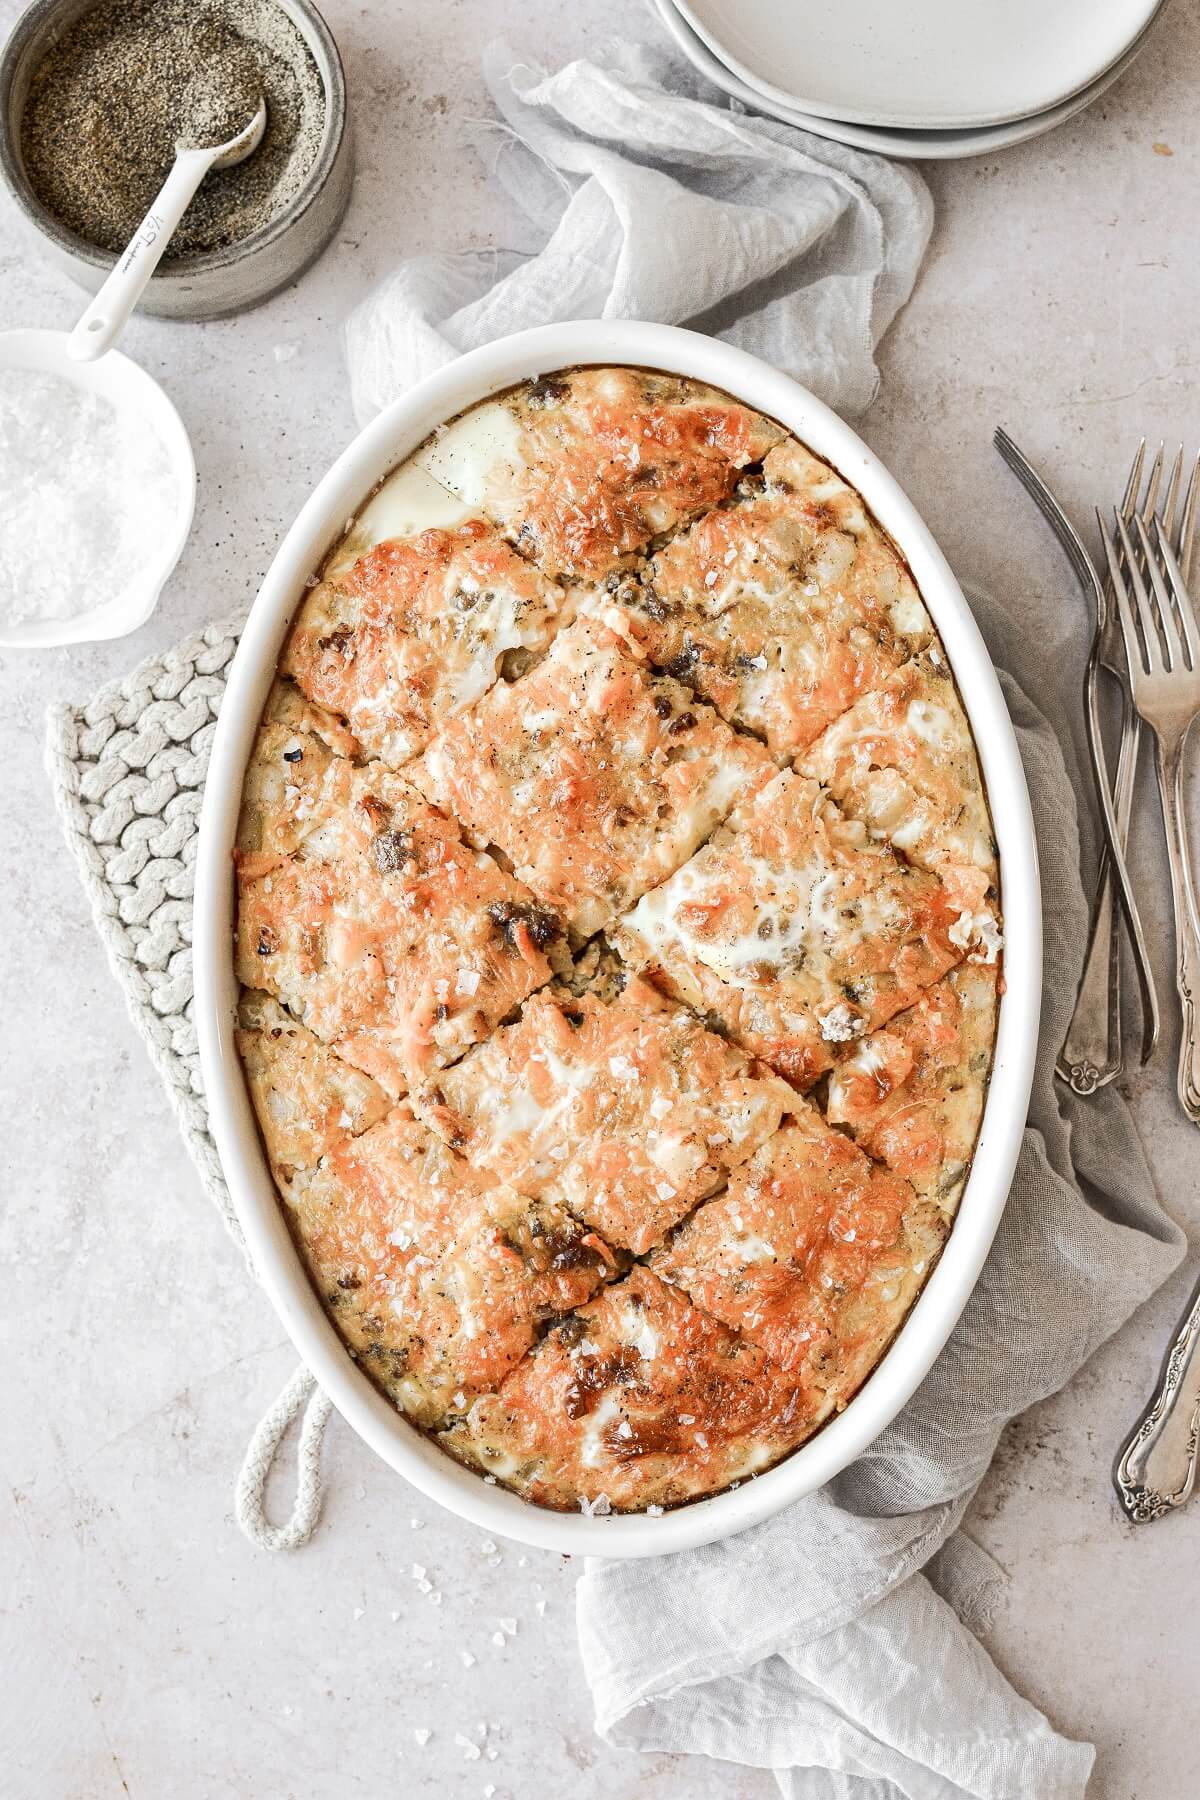 Sausage hashbrown breakfast casserole cut into pieces in a white oval baking dish.